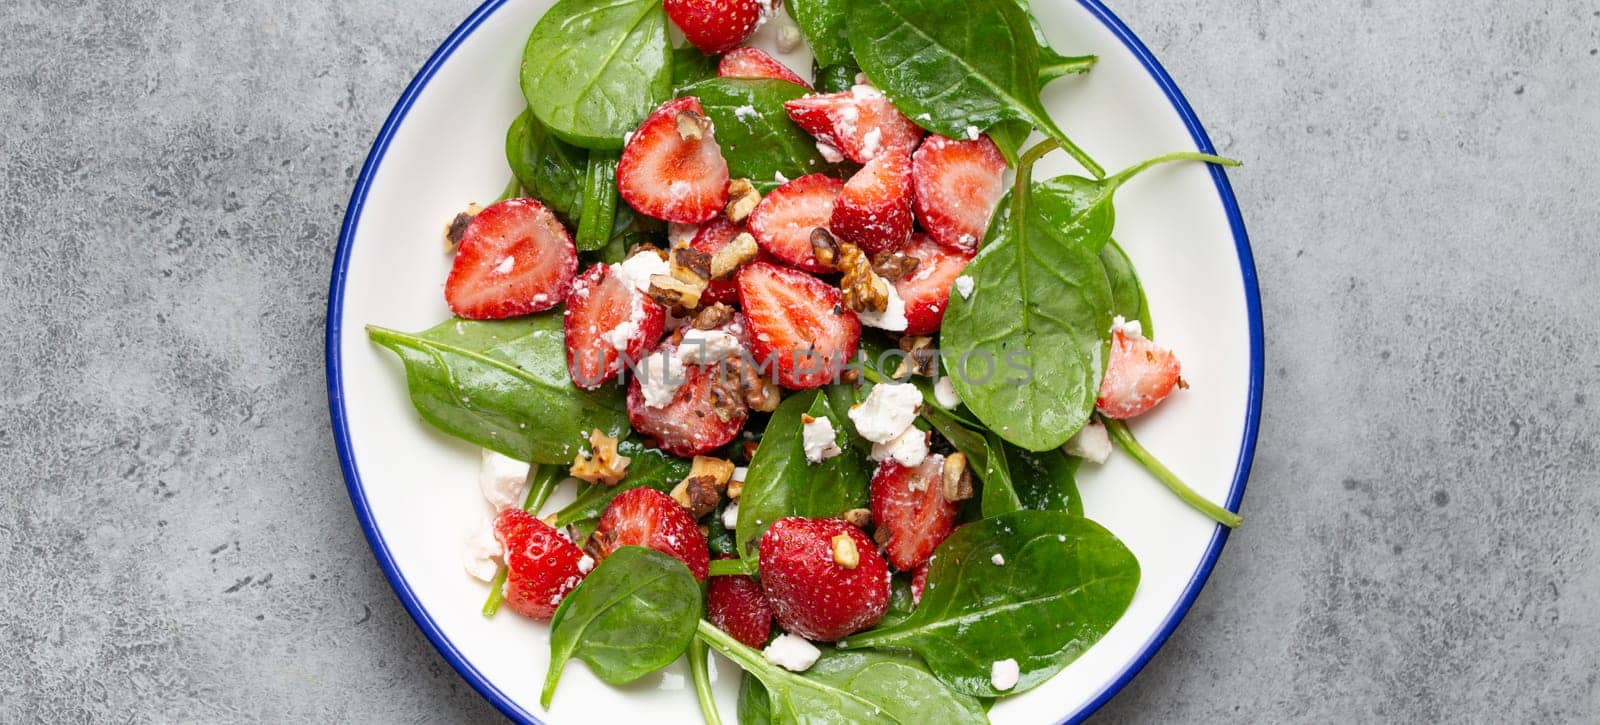 Light Healthy Summer Salad with fresh Strawberries, Spinach, Cream Cheese and Walnuts on White Ceramic Plate, Grey rustic stone Background Top View.